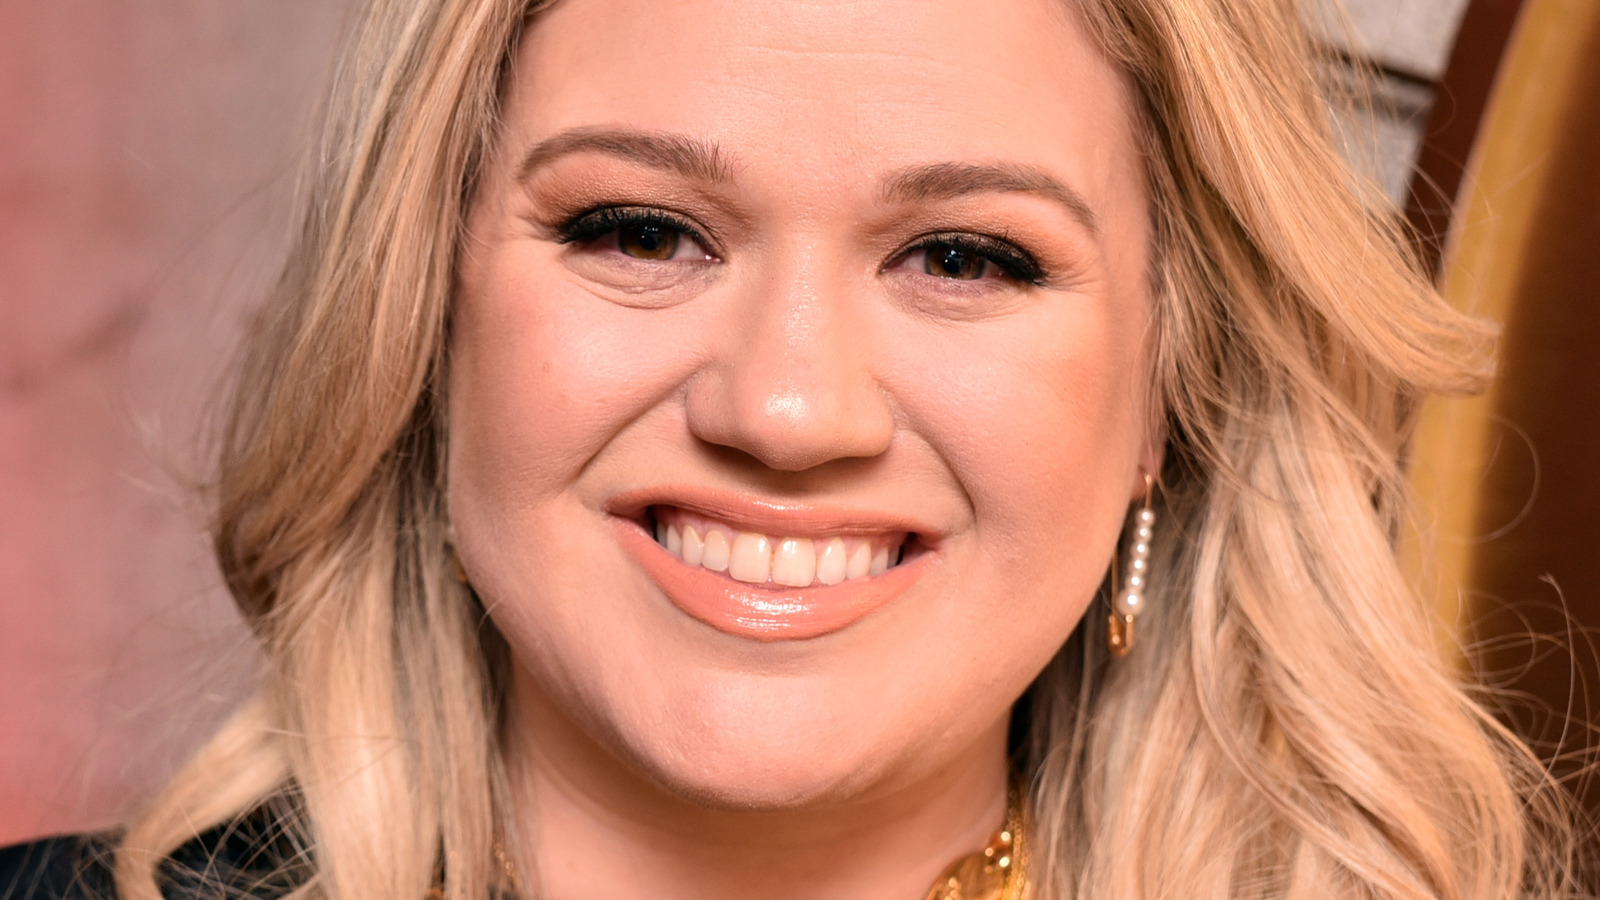 The Truth About Kelly Clarkson’s Ex-Husband Becoming A Grandfather